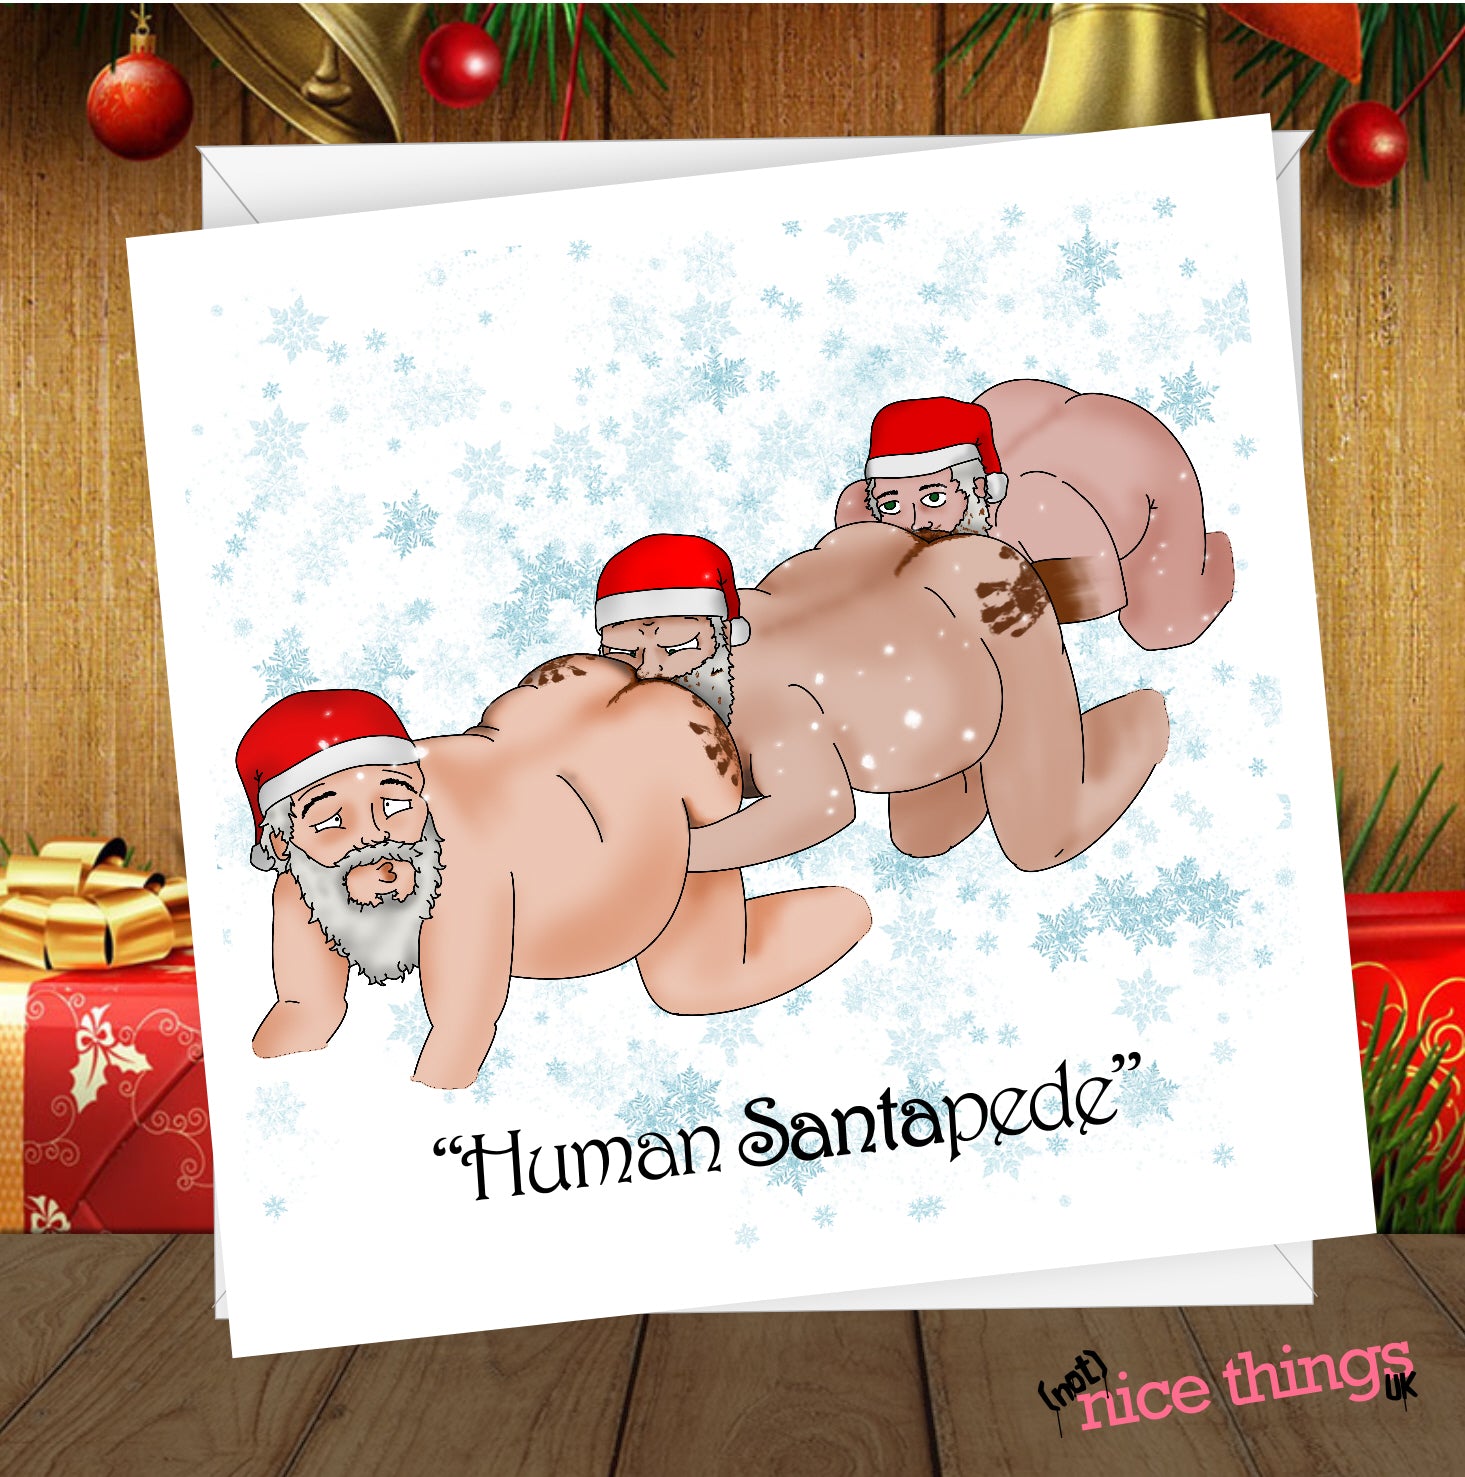 Santapede Funny Christmas Card, Rude Christmas Card Greetings Card for him, for her, Boyfriend, Girlfriend, Dad